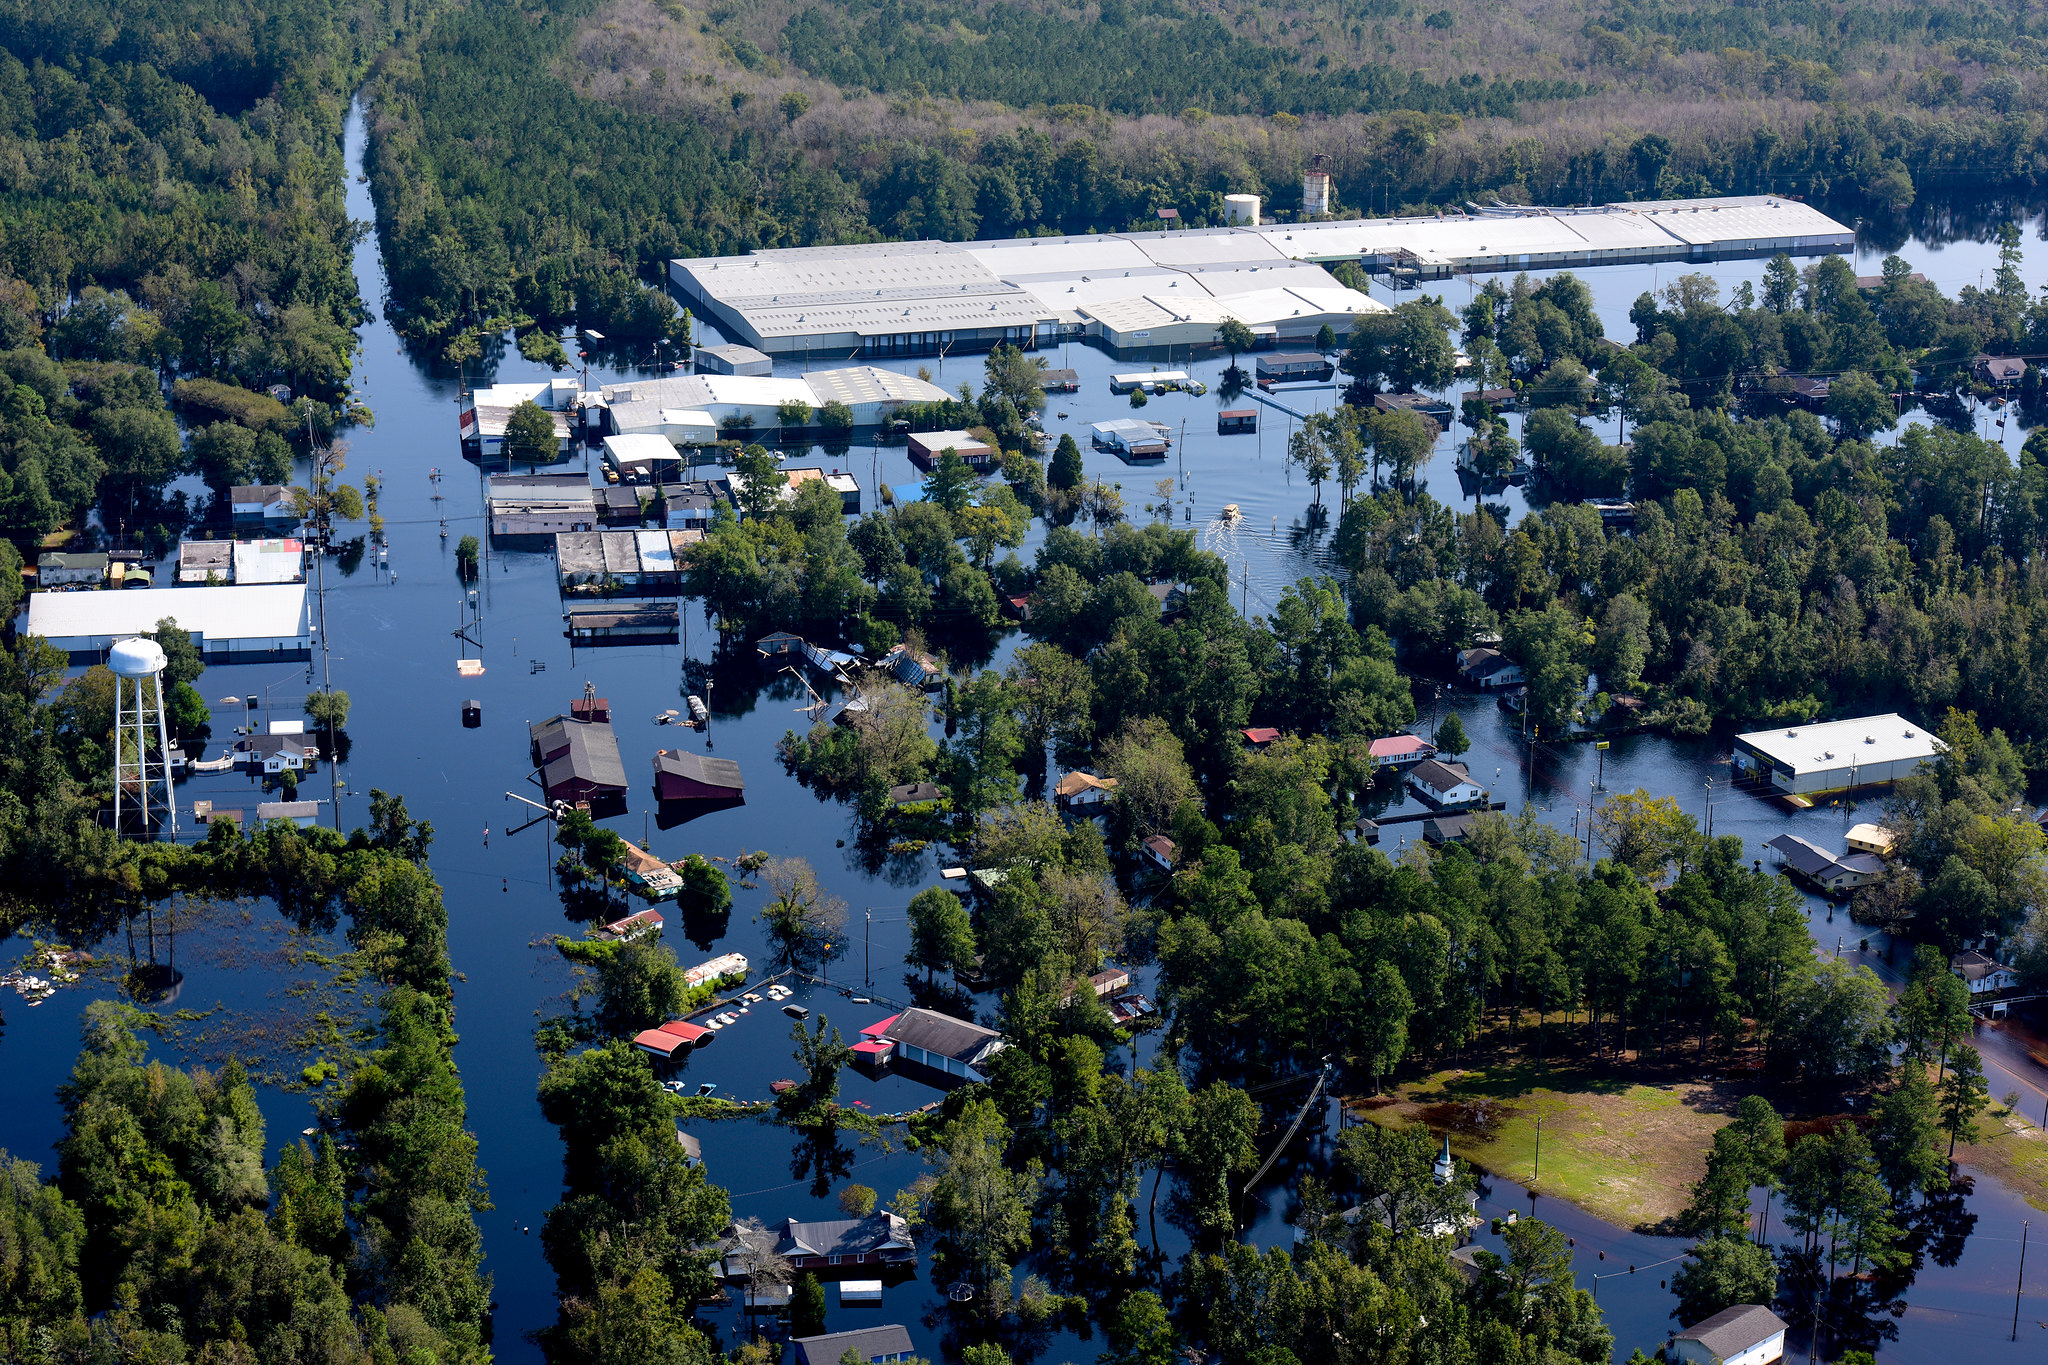 Aerial photos of flooding caused by Hurricane Florence.